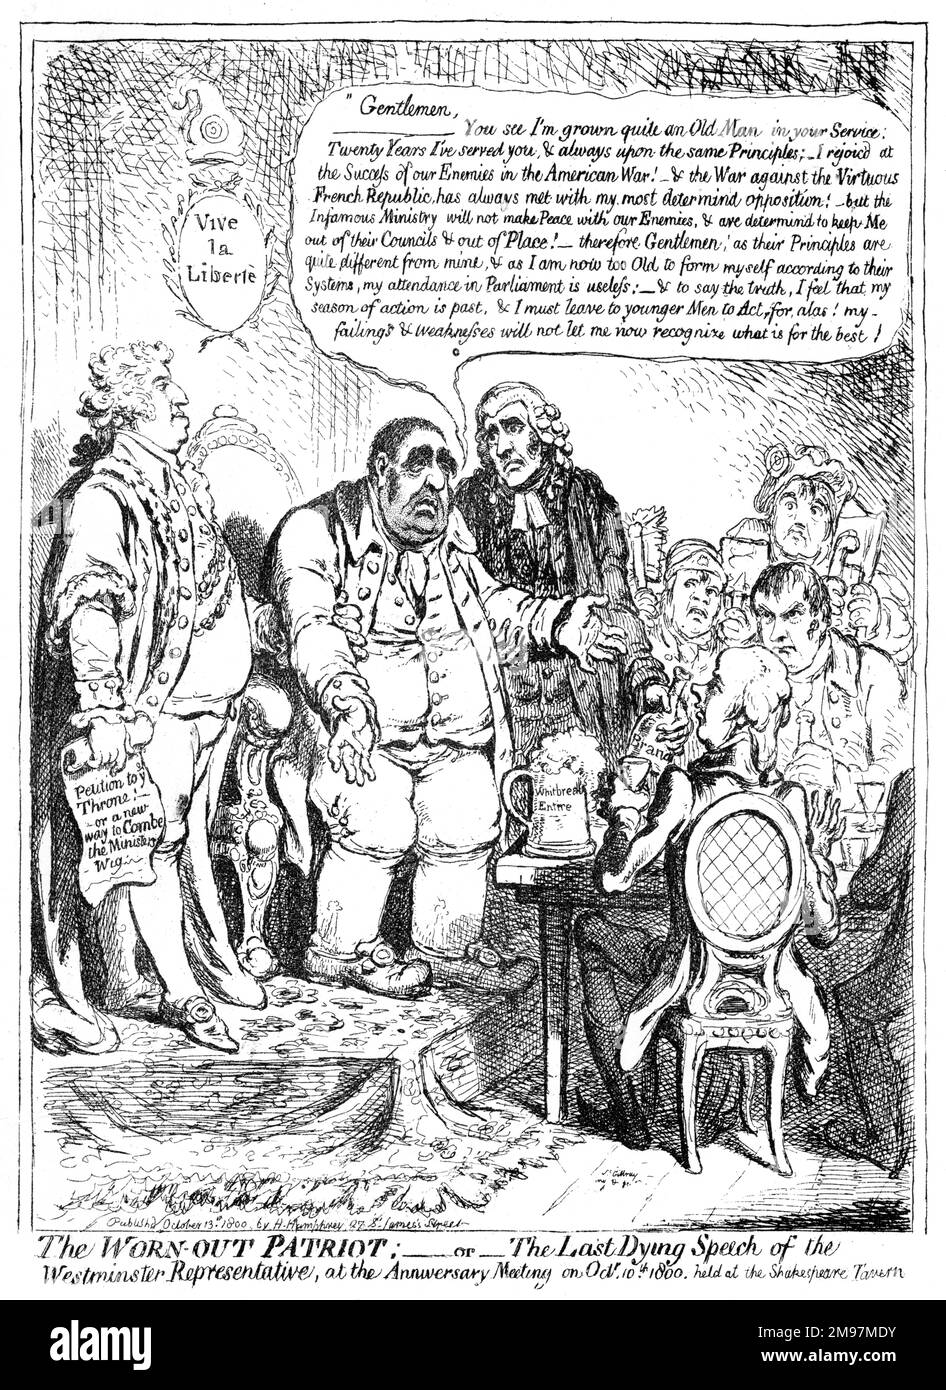 Cartoon, The Worn-Out Patriot, or, The Last Dying Speech of the Westminster Representative, at the Anniversary Meeting on 10 October 1800, held at the Shakespeare Tavern, by James Gillray.  Showing Charles James Fox, Whig leader, with the Lord Mayor of London (Harvey Christian Combe), Erskine, Grey and Tierney.  Ironically, Fox gives a speech in which his absence of patriotism is evident. Stock Photo